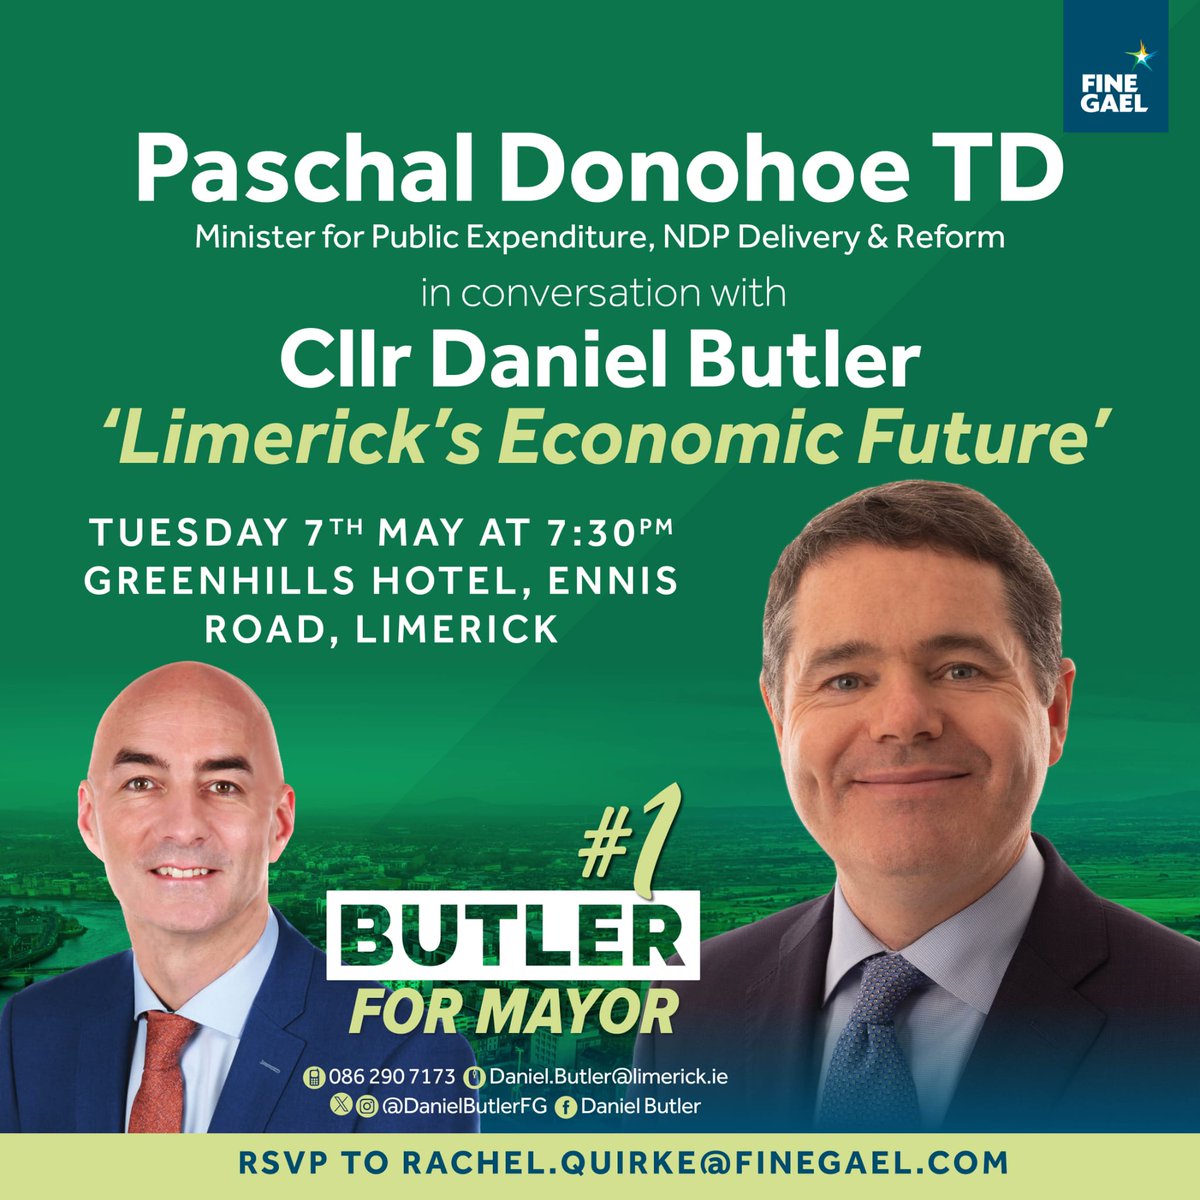 Delighted to invite you to join me in a conversation with @Paschald TD, Minister for Public Expenditure, NDP Delivery & Reform. We will be discussing Limericks Economic Future. We will also be joined by a local industry leader. RSVP to Rachel.Quirke@FineGael.com #ButlerForMayor